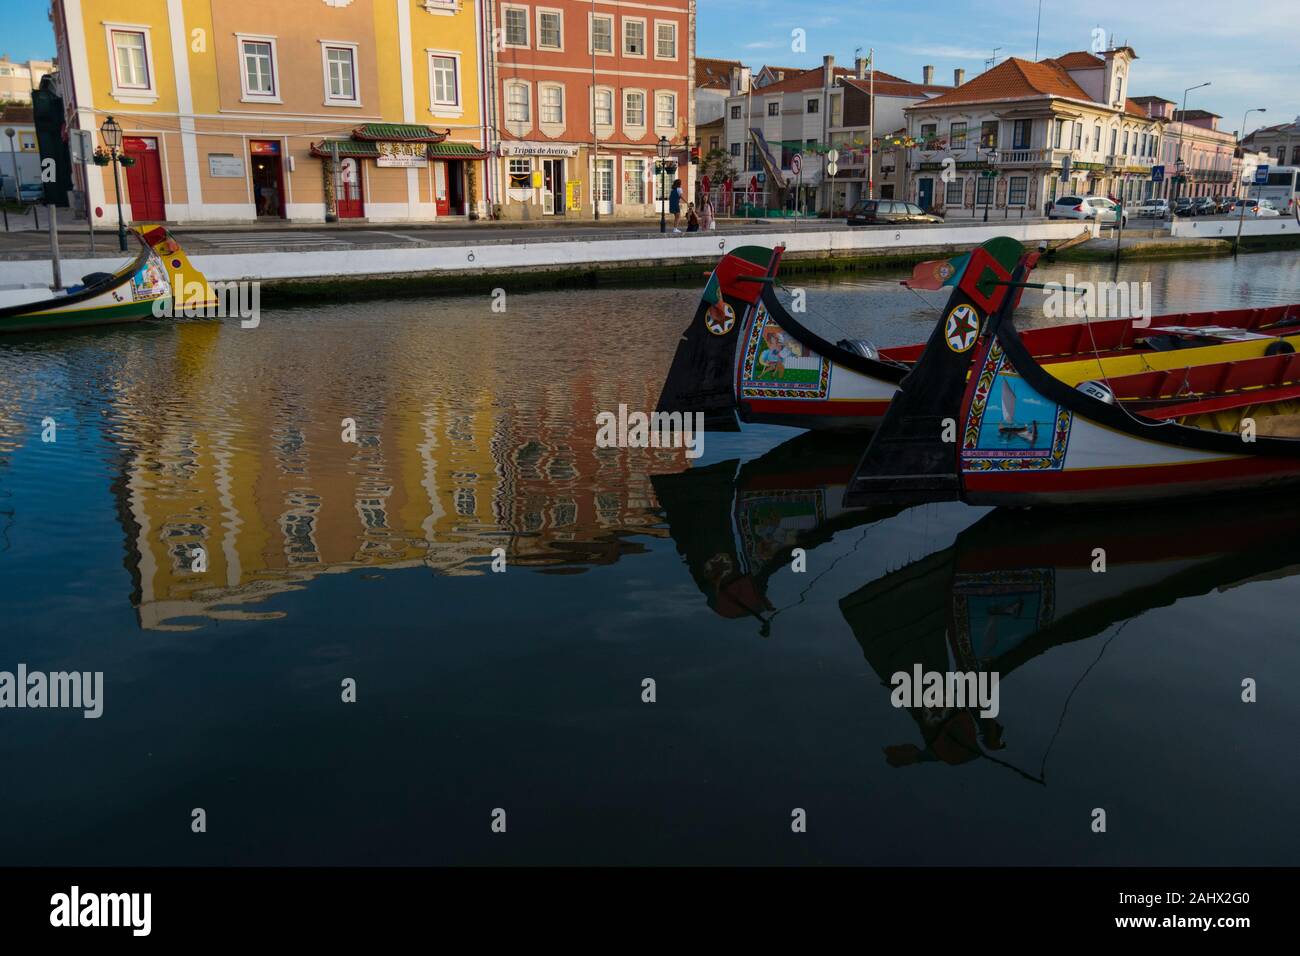 Moliceiro boats moored on the central canal in Aveiro Portugal Stock Photo